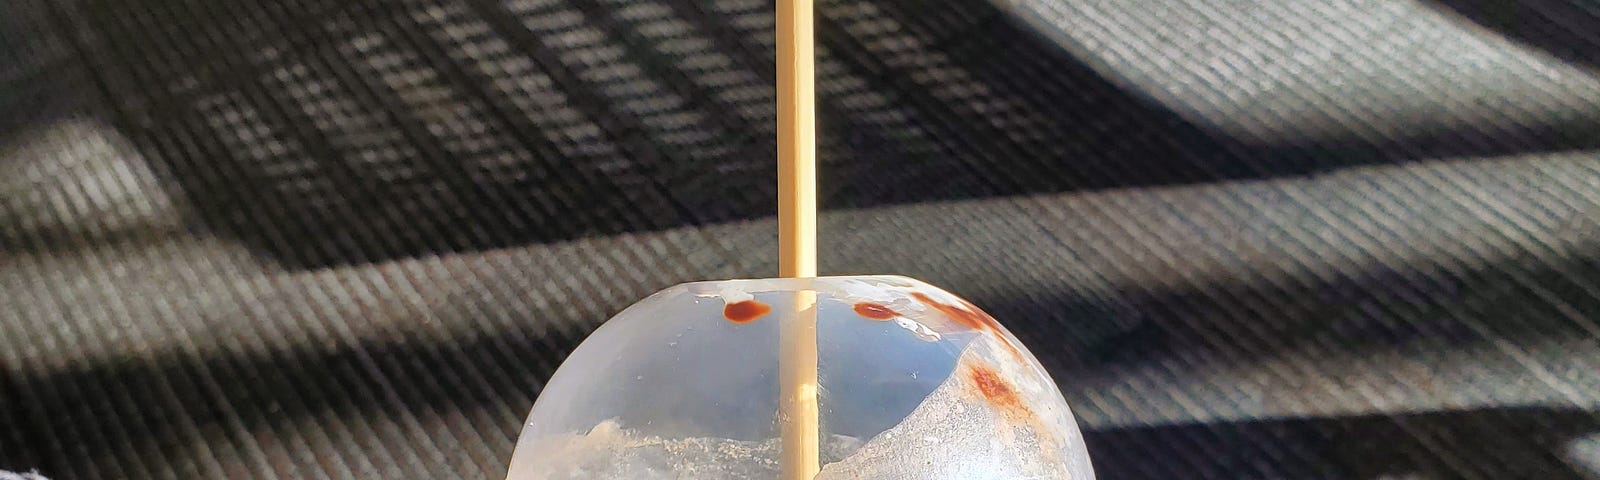 A Starbucks Frappuccino with a chopstick in the middle, where a straw should be.